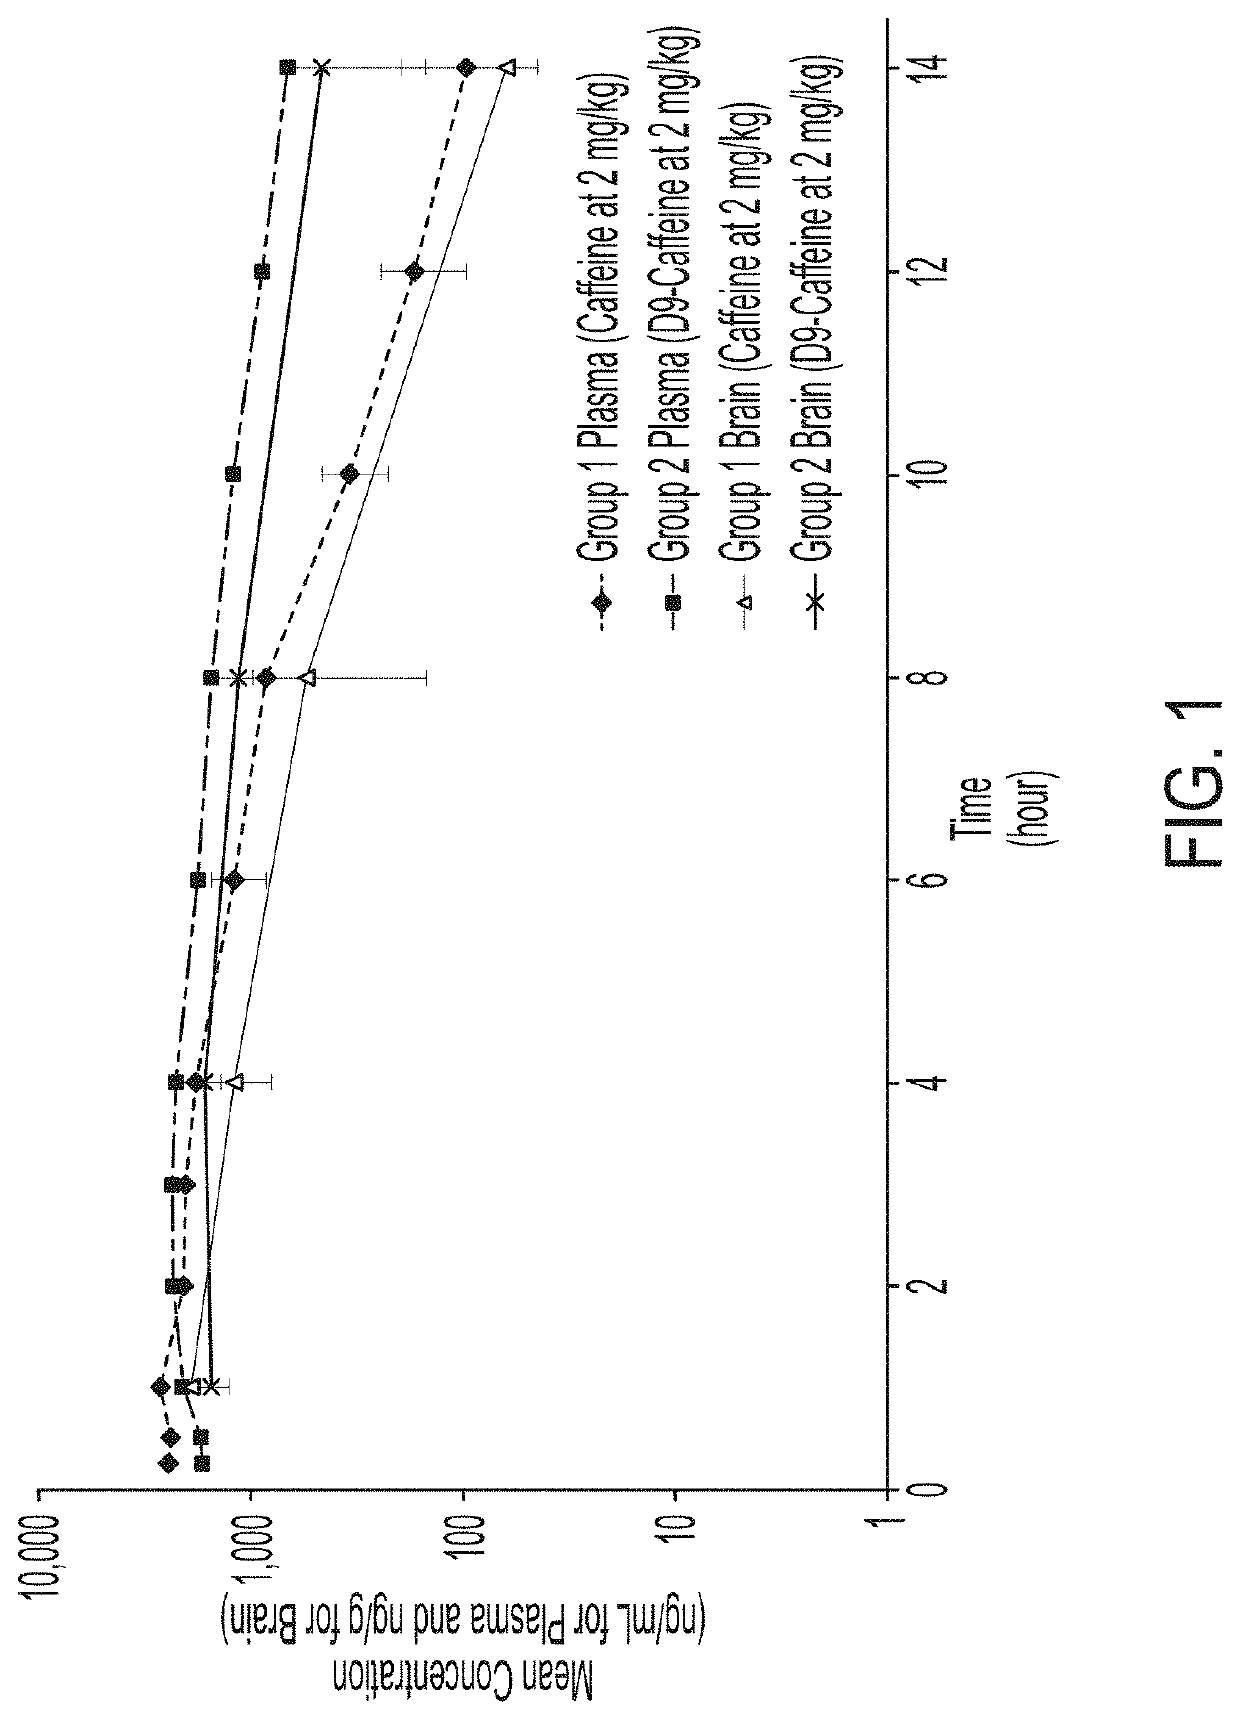 Deuterated caffeine and uses thereof